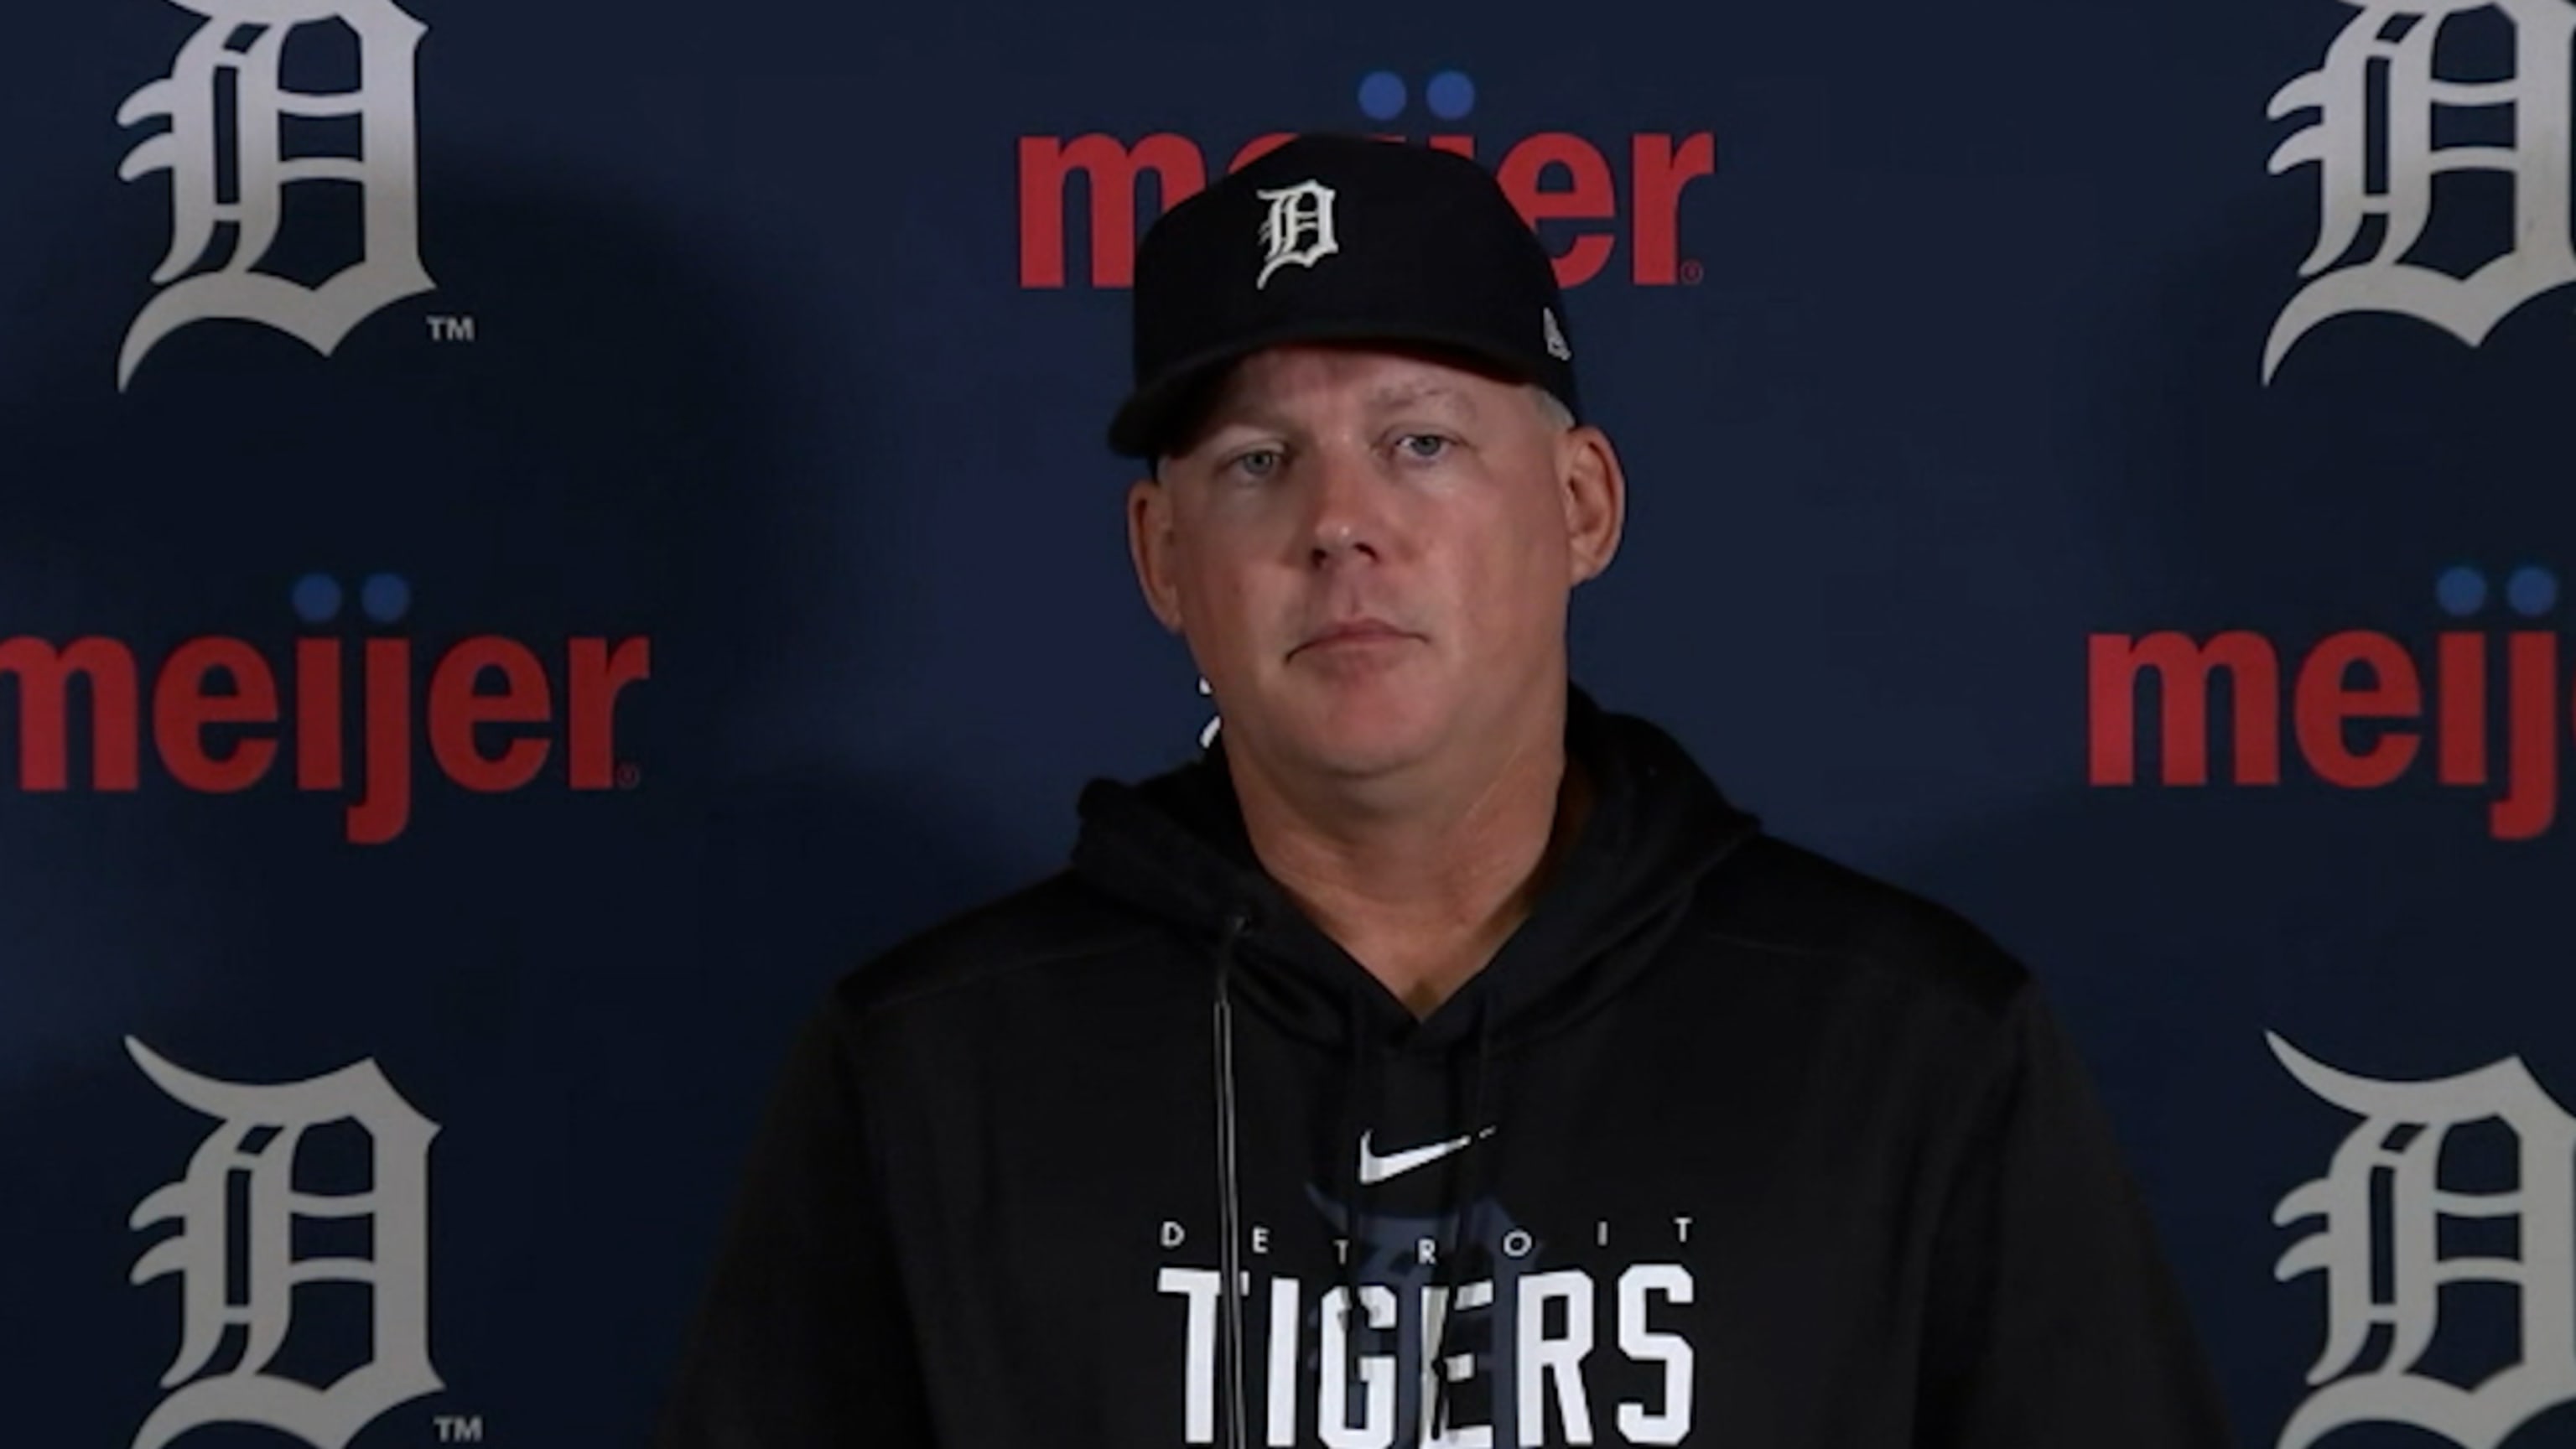 A.J. Hinch transformed the Detroit Tigers in 2021 - Bless You Boys